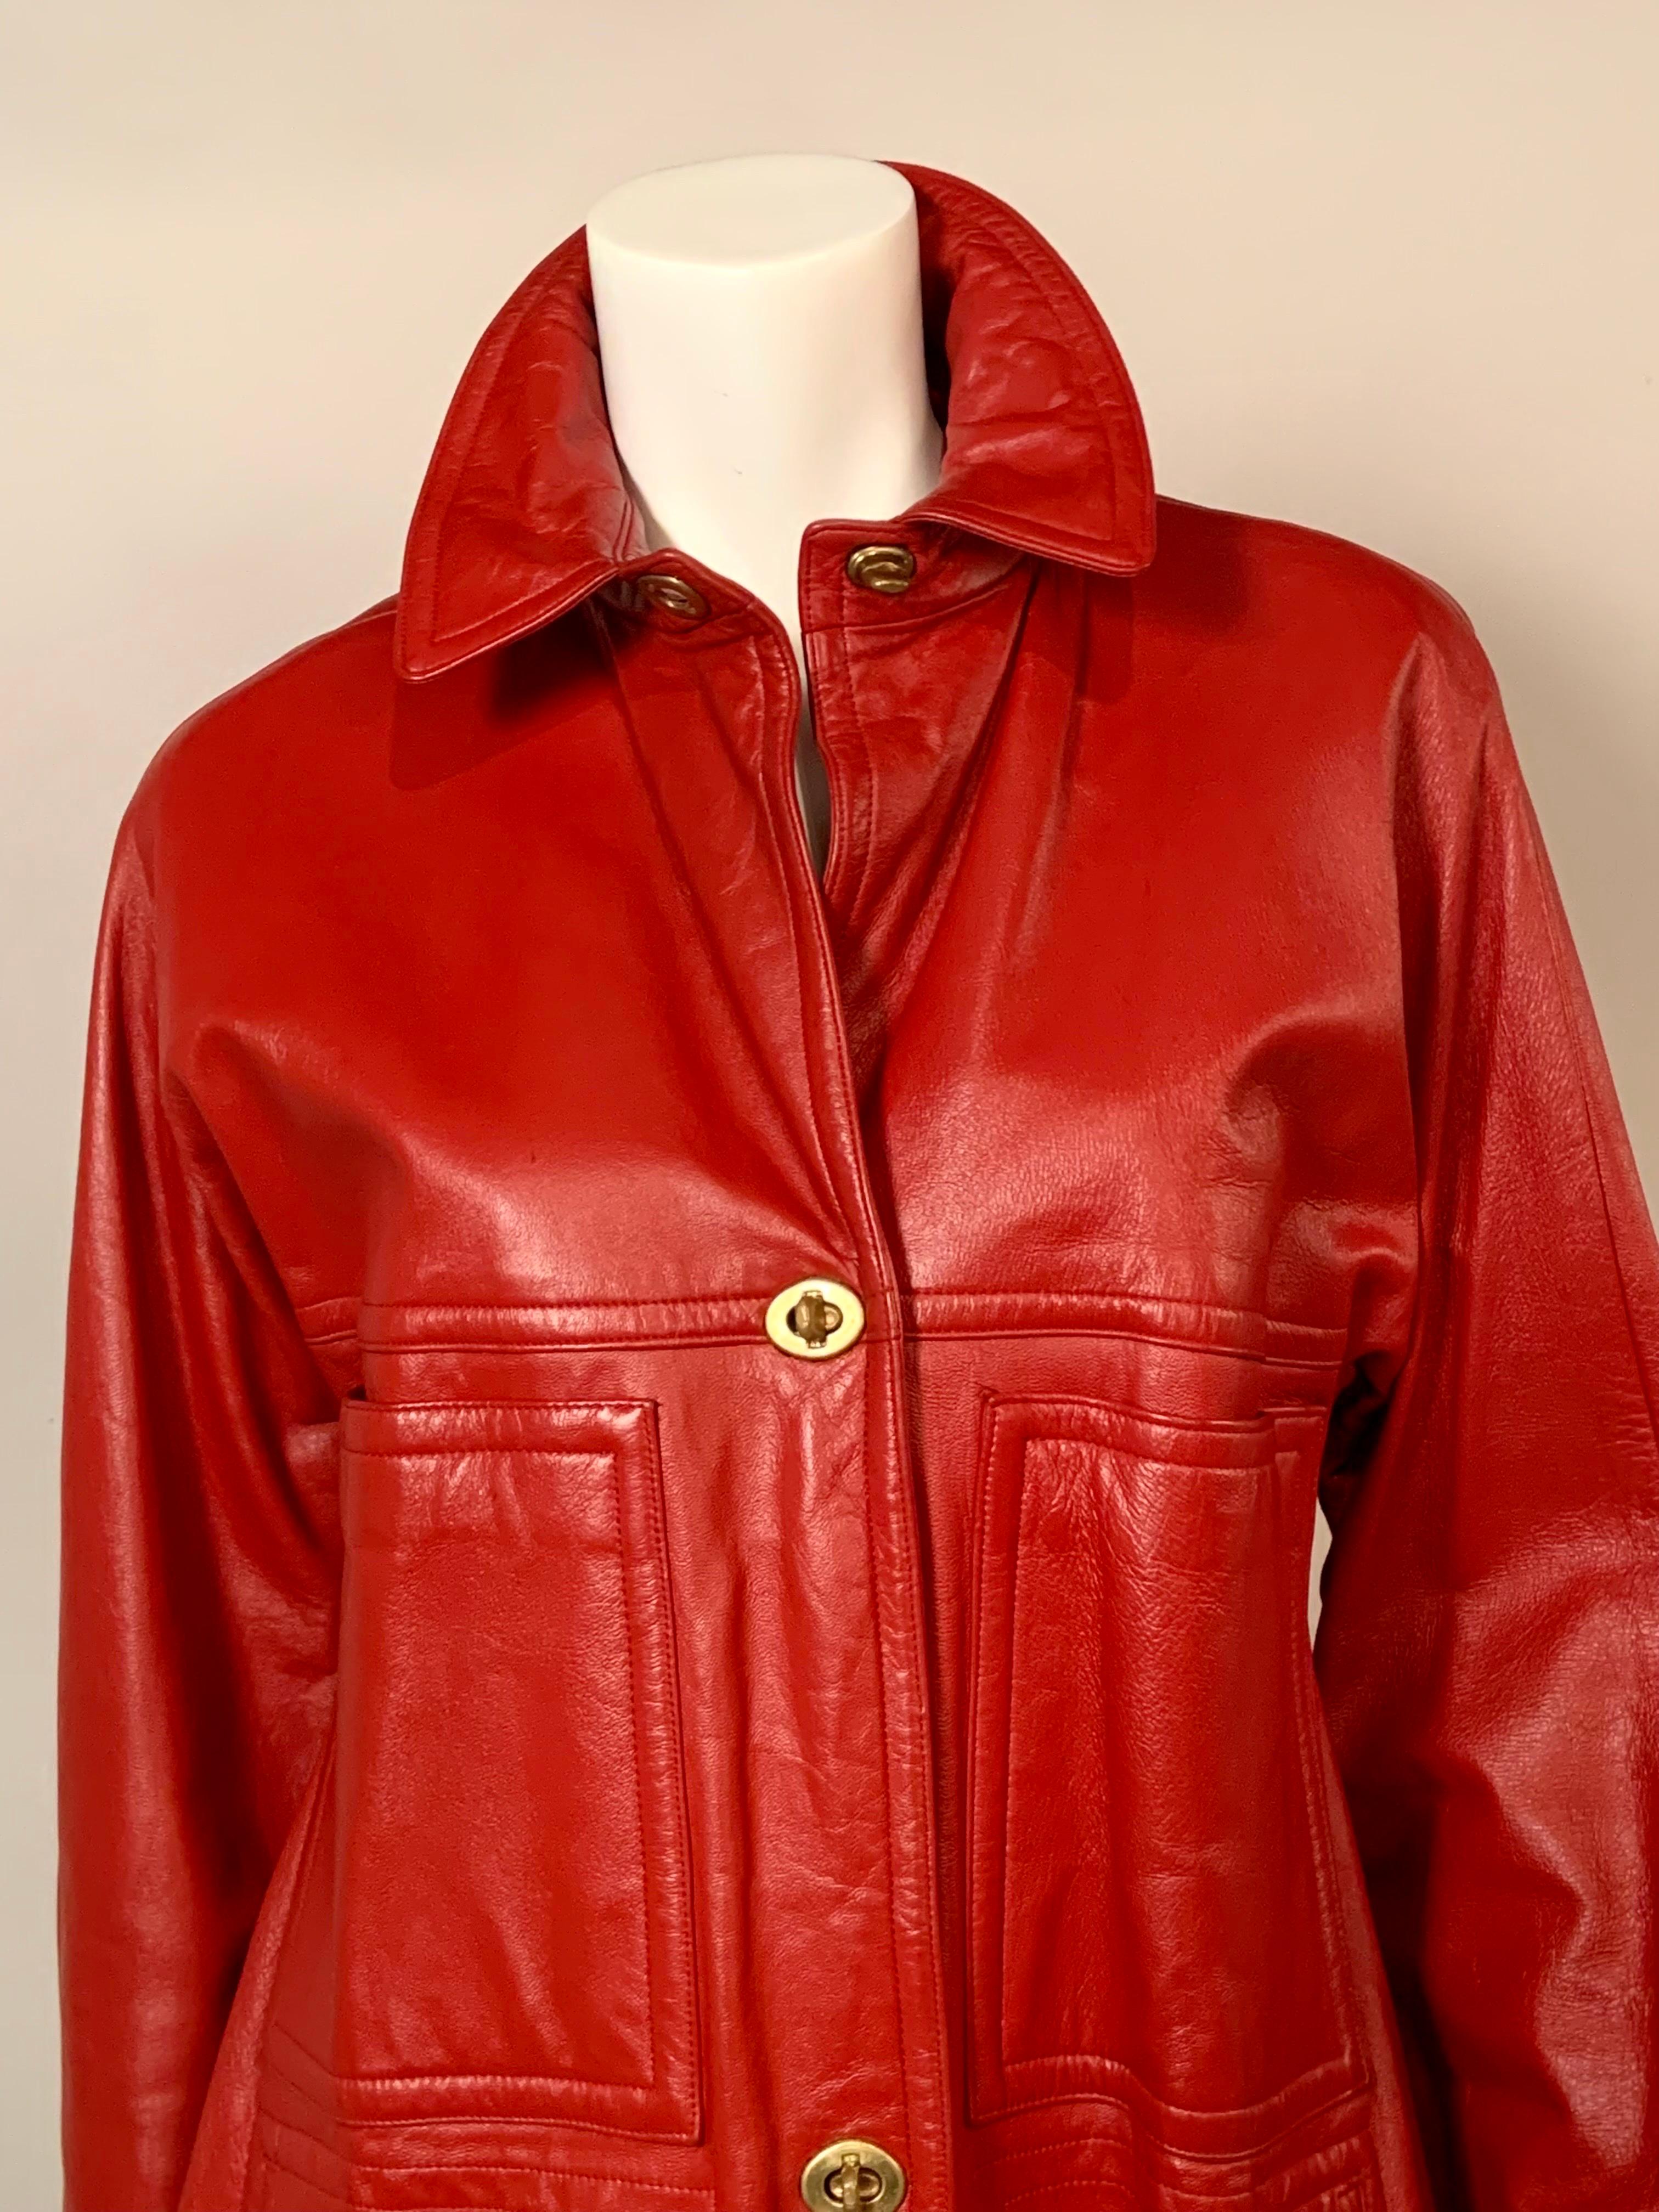 This cheerful bright red leather coat was designed by Bonnie Cashin for Sills in the 1960's.  It has four large pockets and her signature brass toggle closures. It is fully lined in red silk crepe and it is in excellent condition.  There is no size